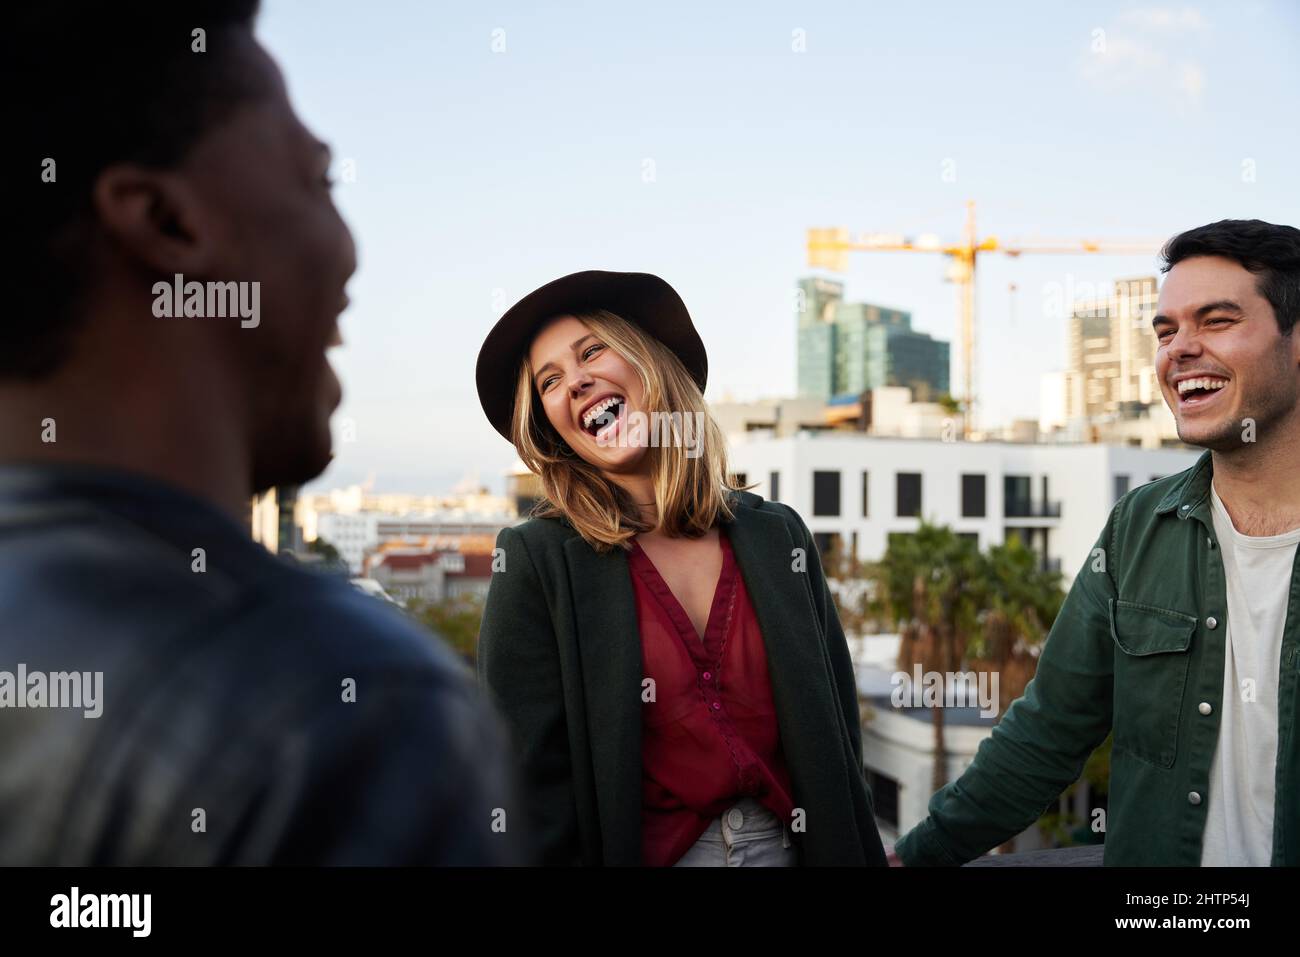 Caucasian female laughing with diverse group of friends socializing on a rooftop terrace at dusk. Stock Photo